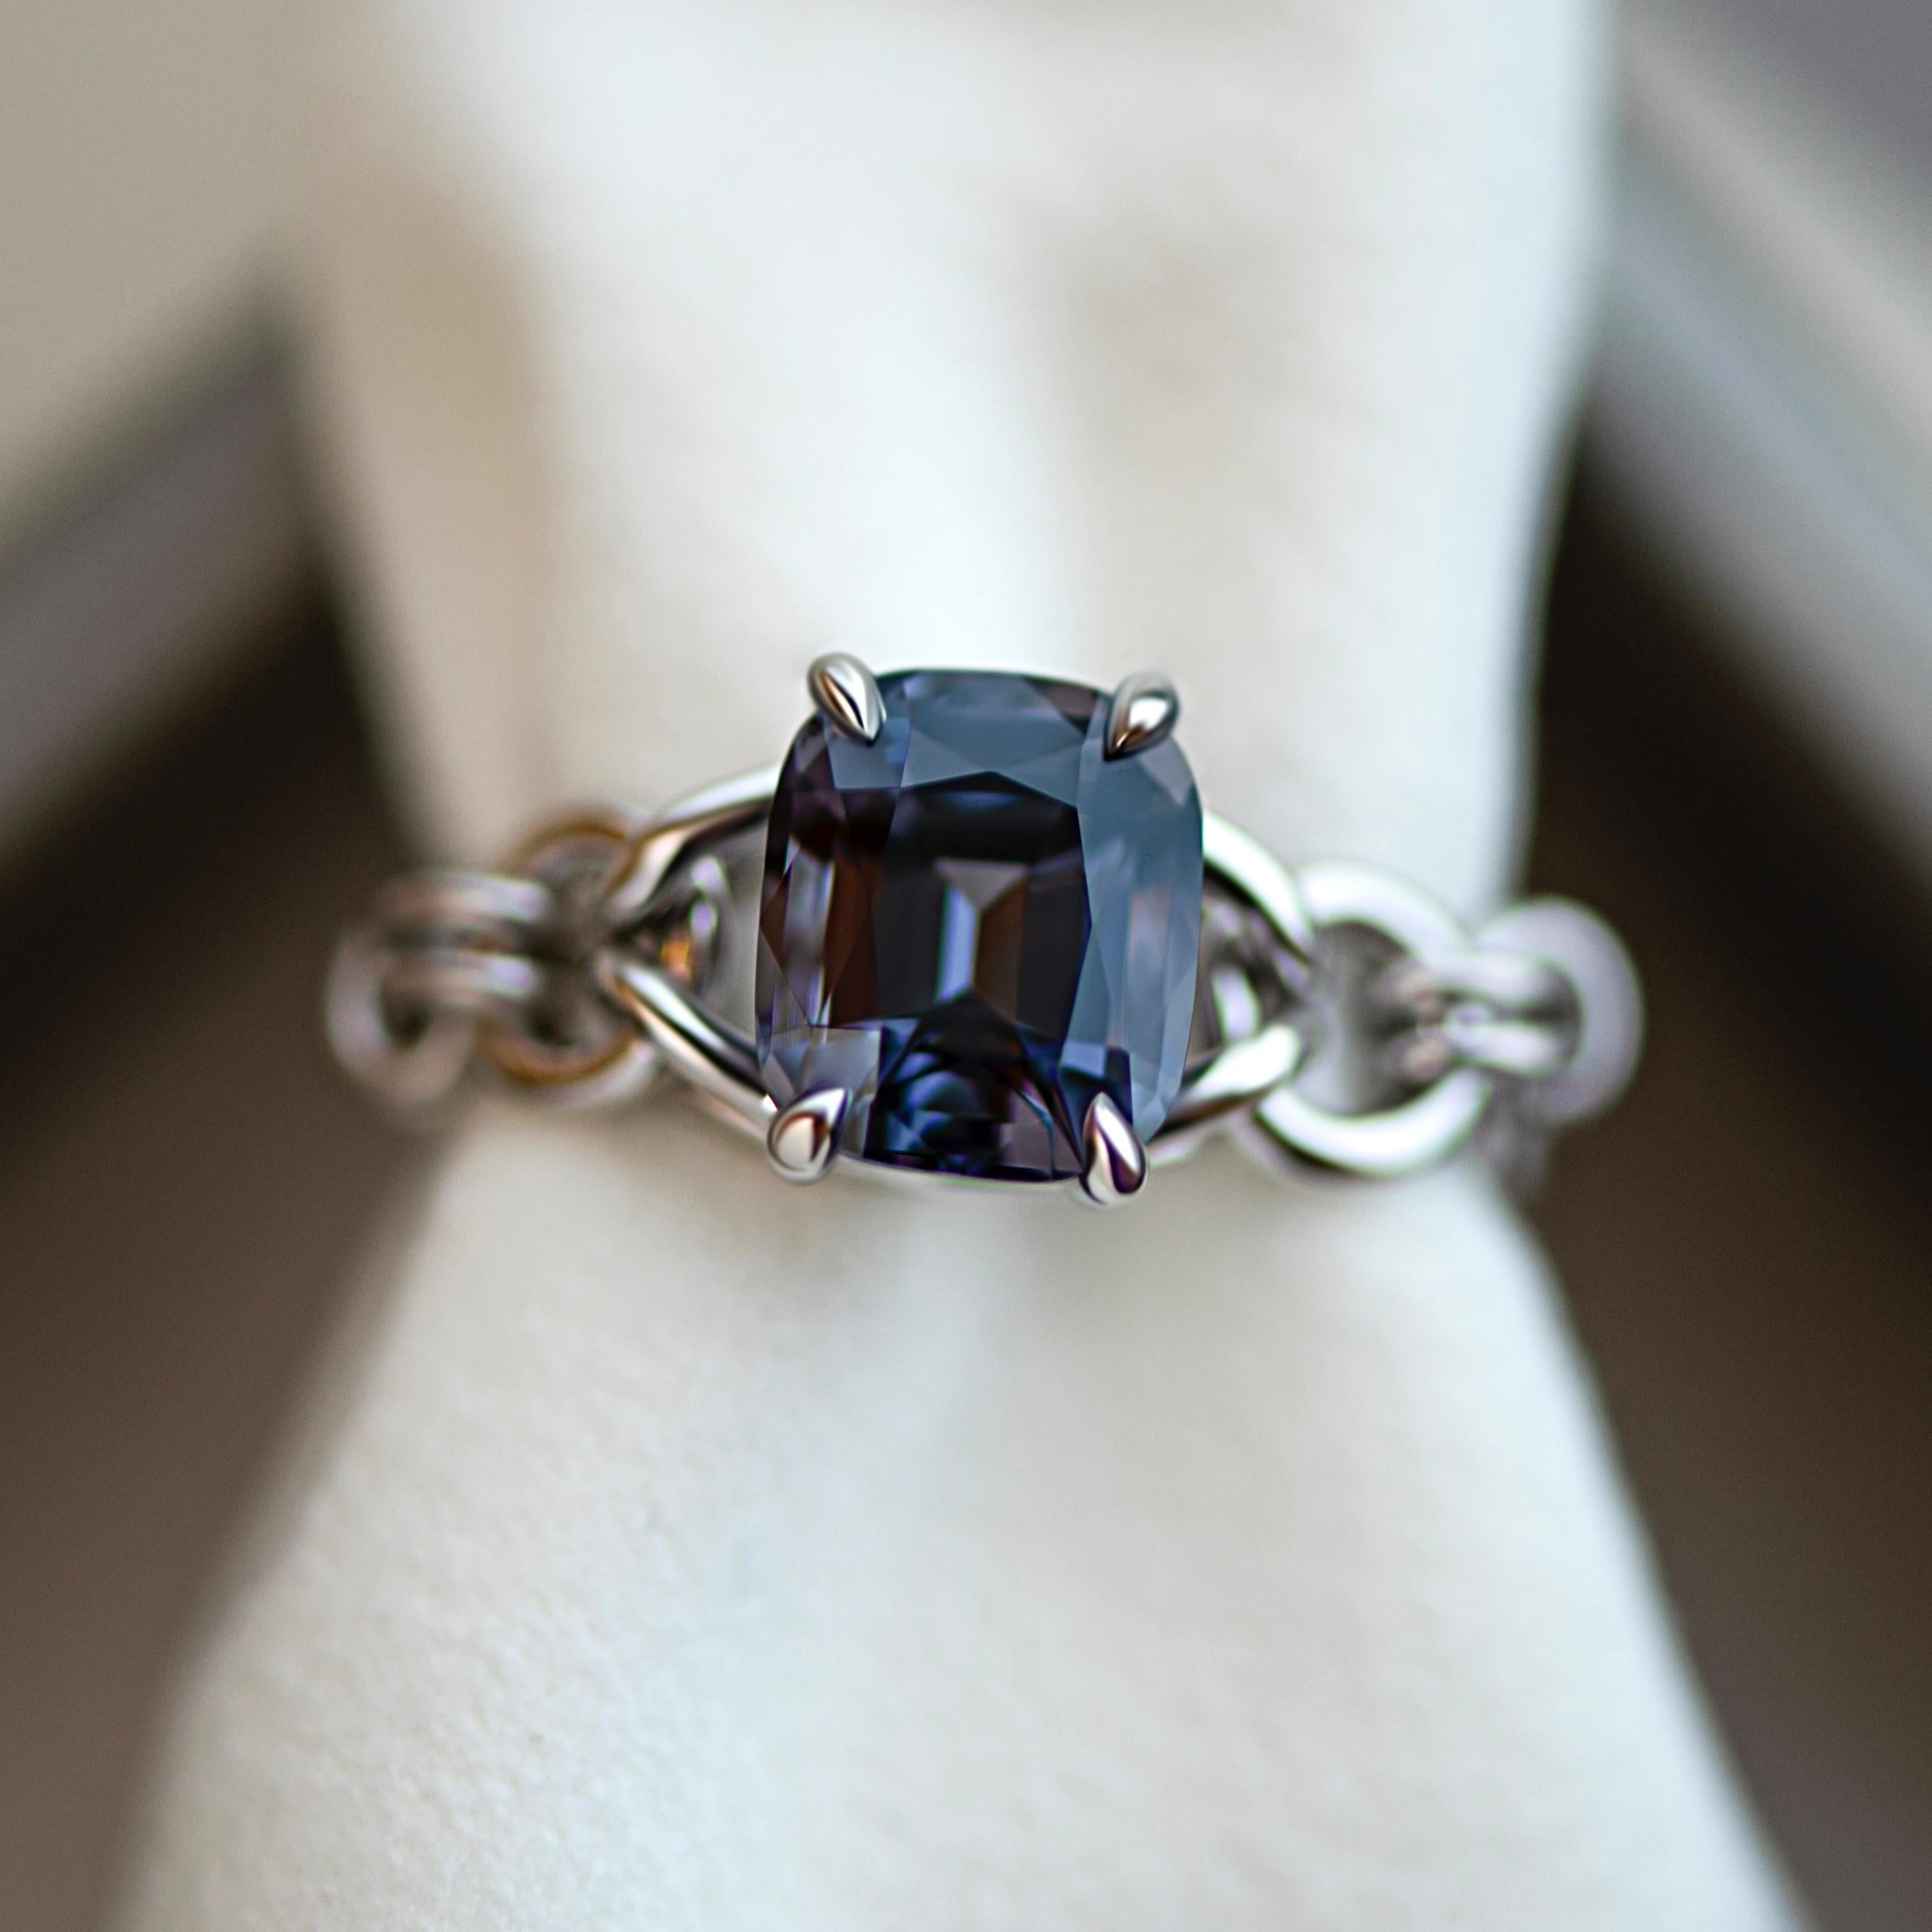 Ring for spinel lovers from the new collection 